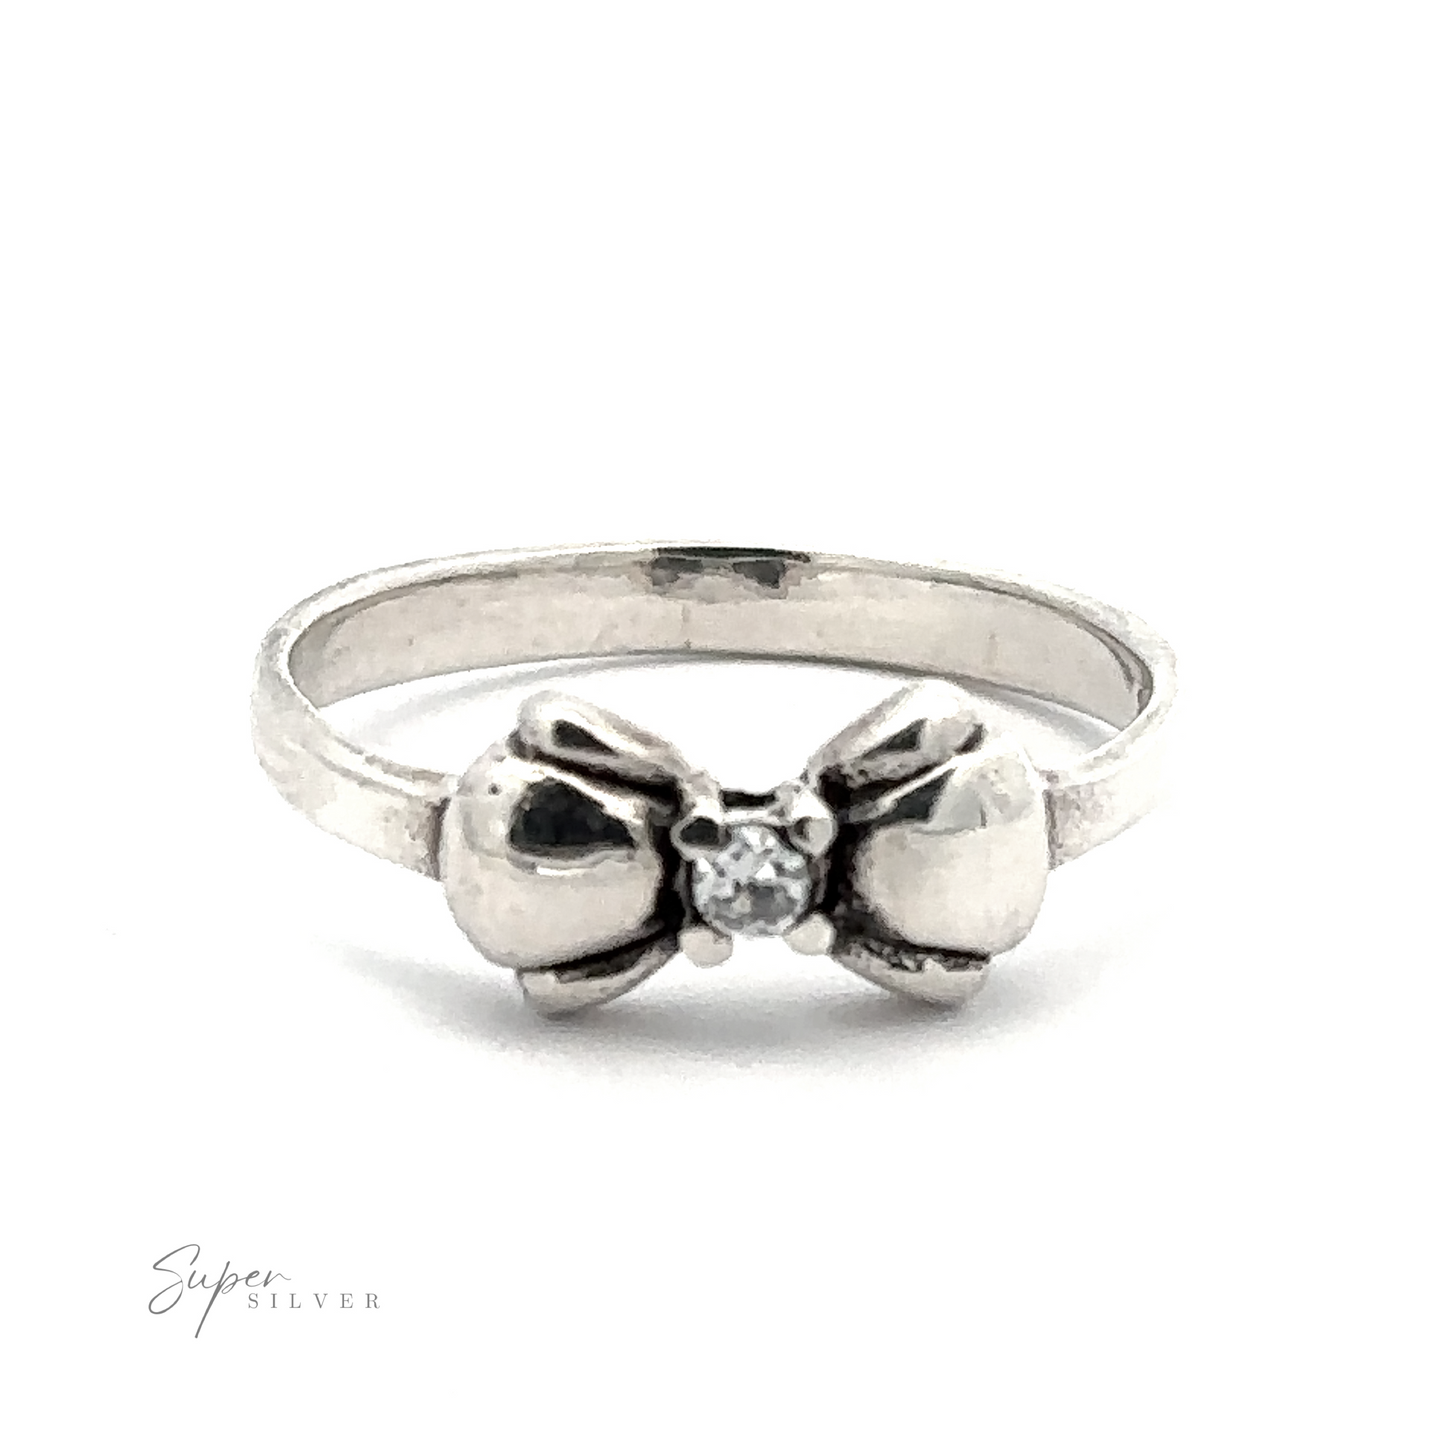 
                  
                    A sterling silver ring with a bow design and a small central black cubic zirconia gemstone. The bow is detailed, and the band is plain. The ring is labeled "Adorable Cubic Zirconia Bow Ring.
                  
                